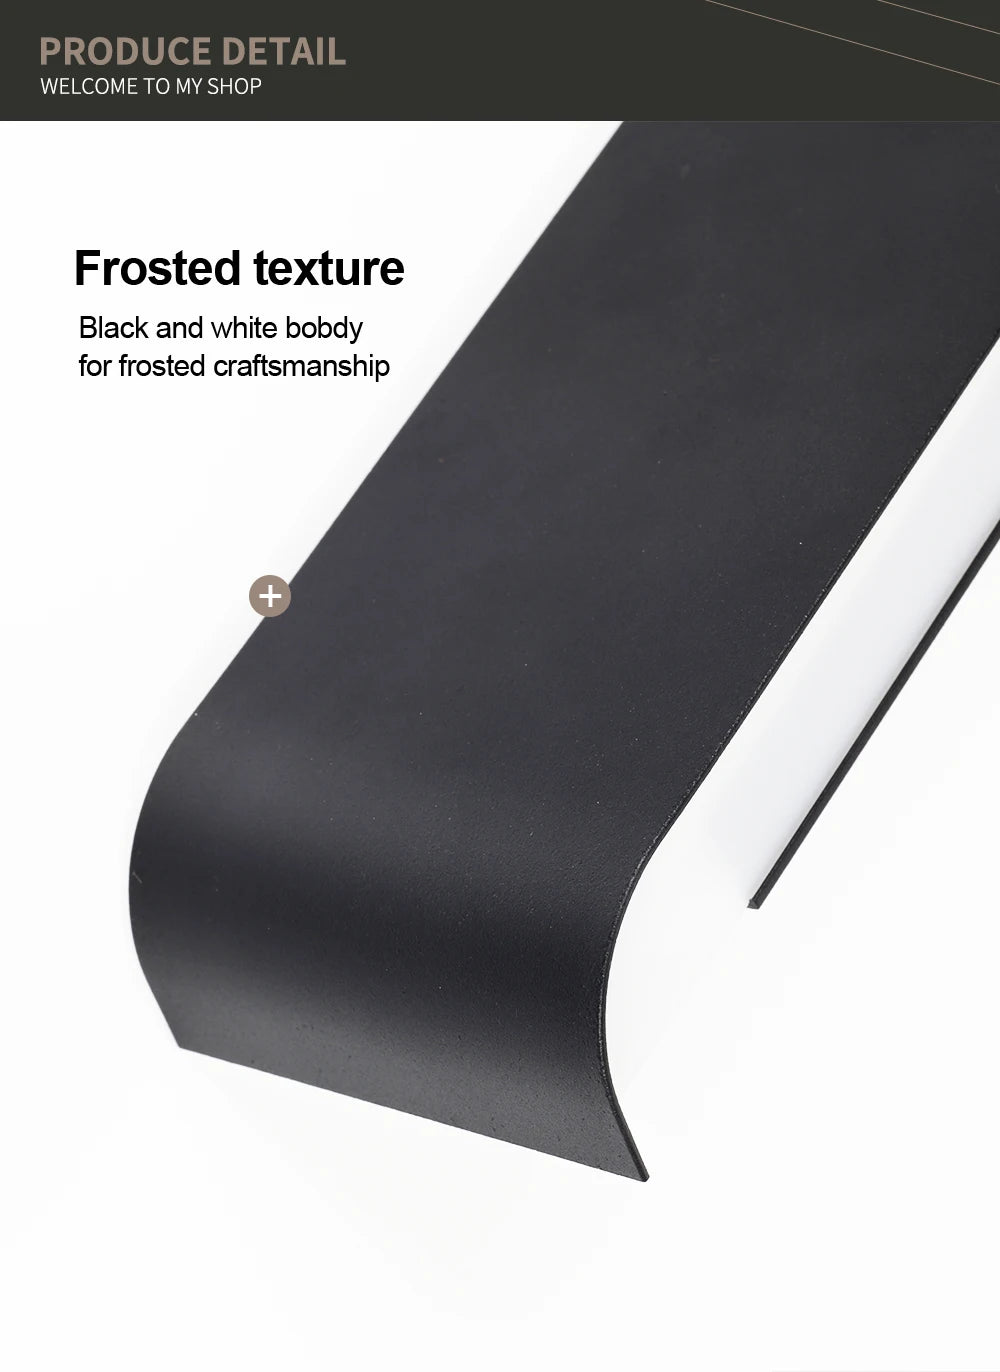 Led Wall Sconce Light, Unique ceramic item with frosted finish and contrasting black and white colors.